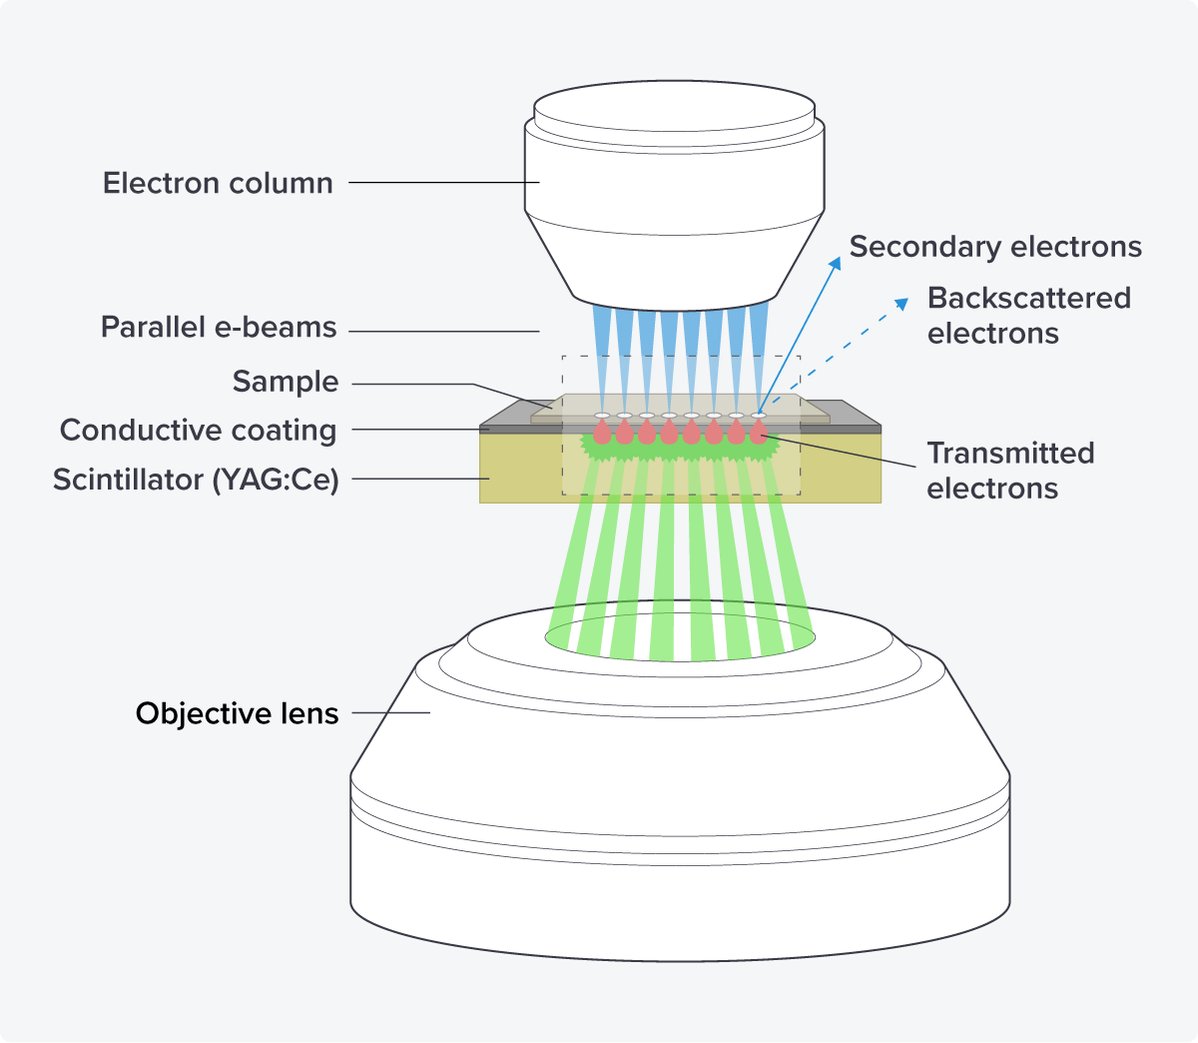 Schematics of the optical scanning transmission electron microscope (OSTEM) components of the FAST-EM.